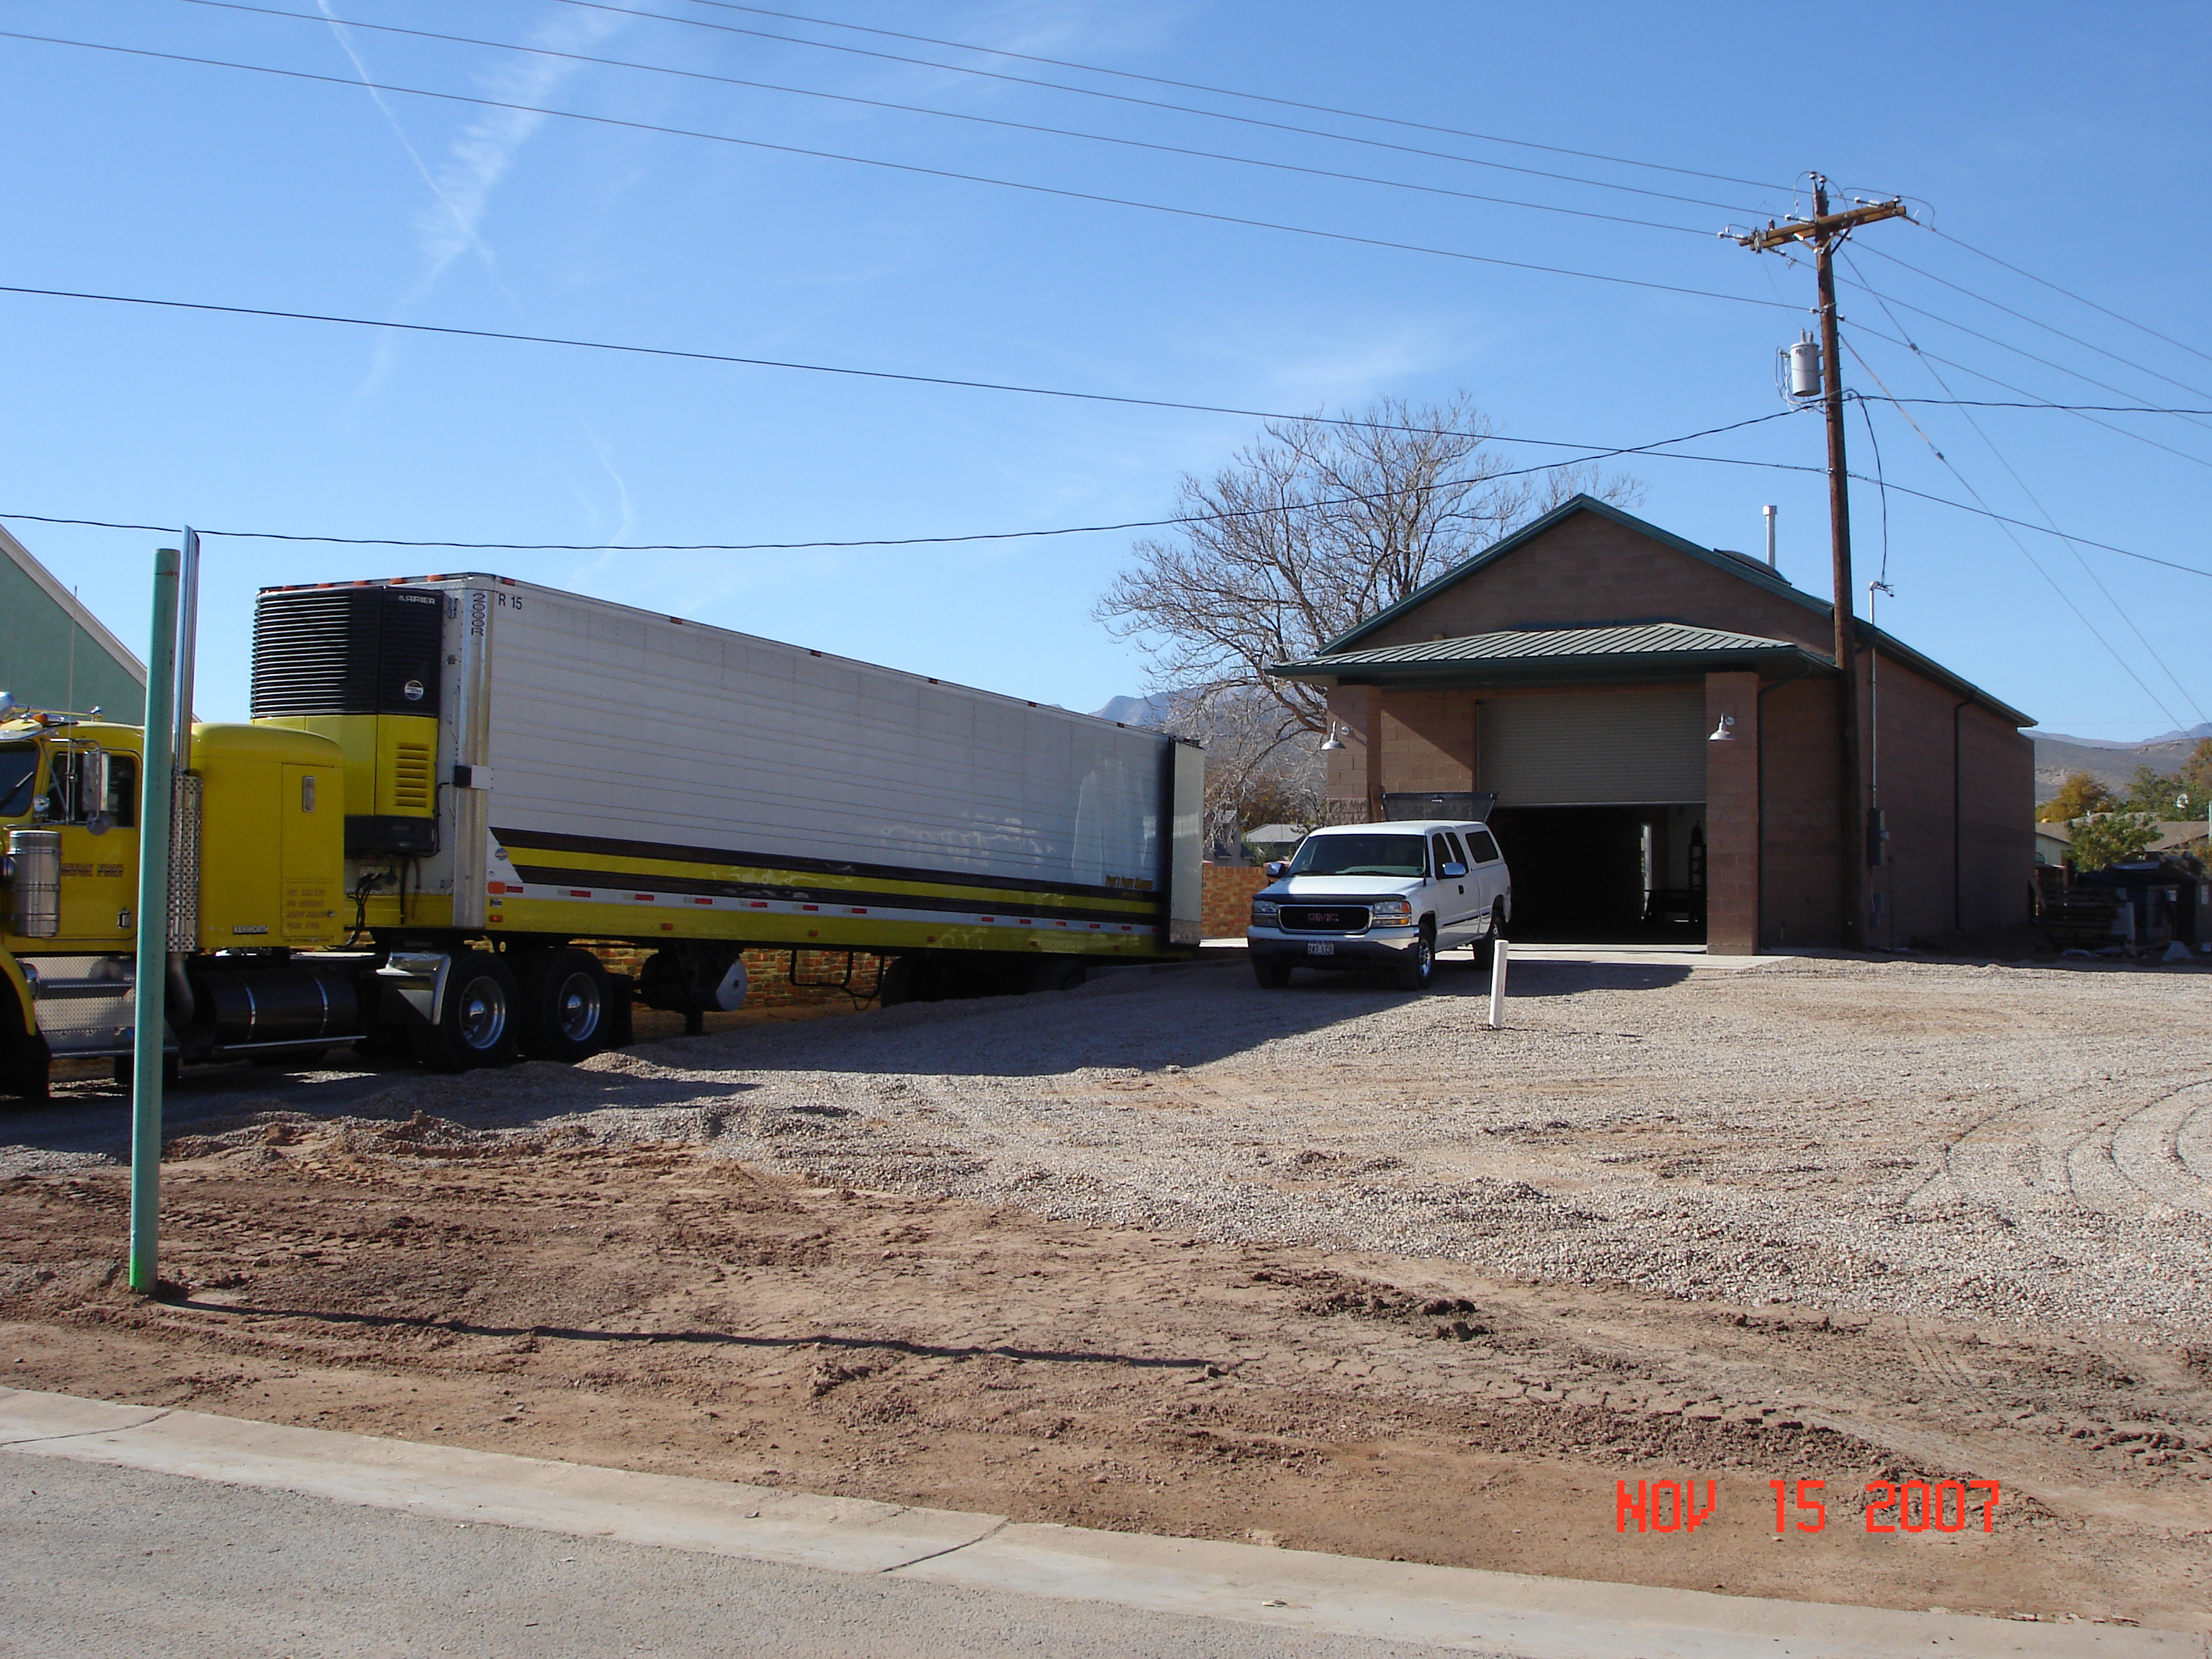 The new Frei's Market Warehouse with a truck in the truck ramp